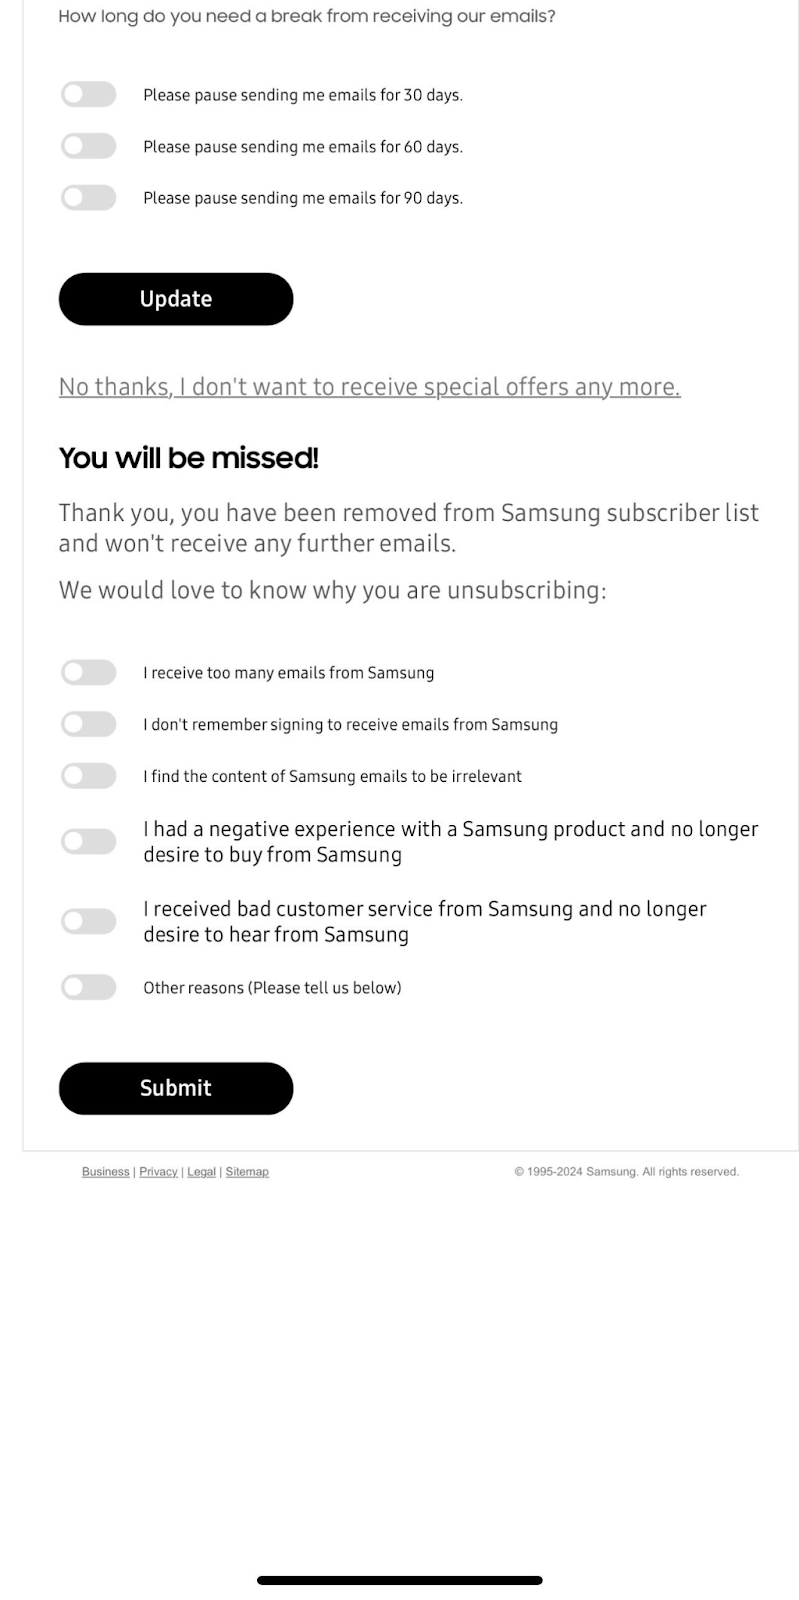 Screenshot of Samsung app survey for unsubscribed users